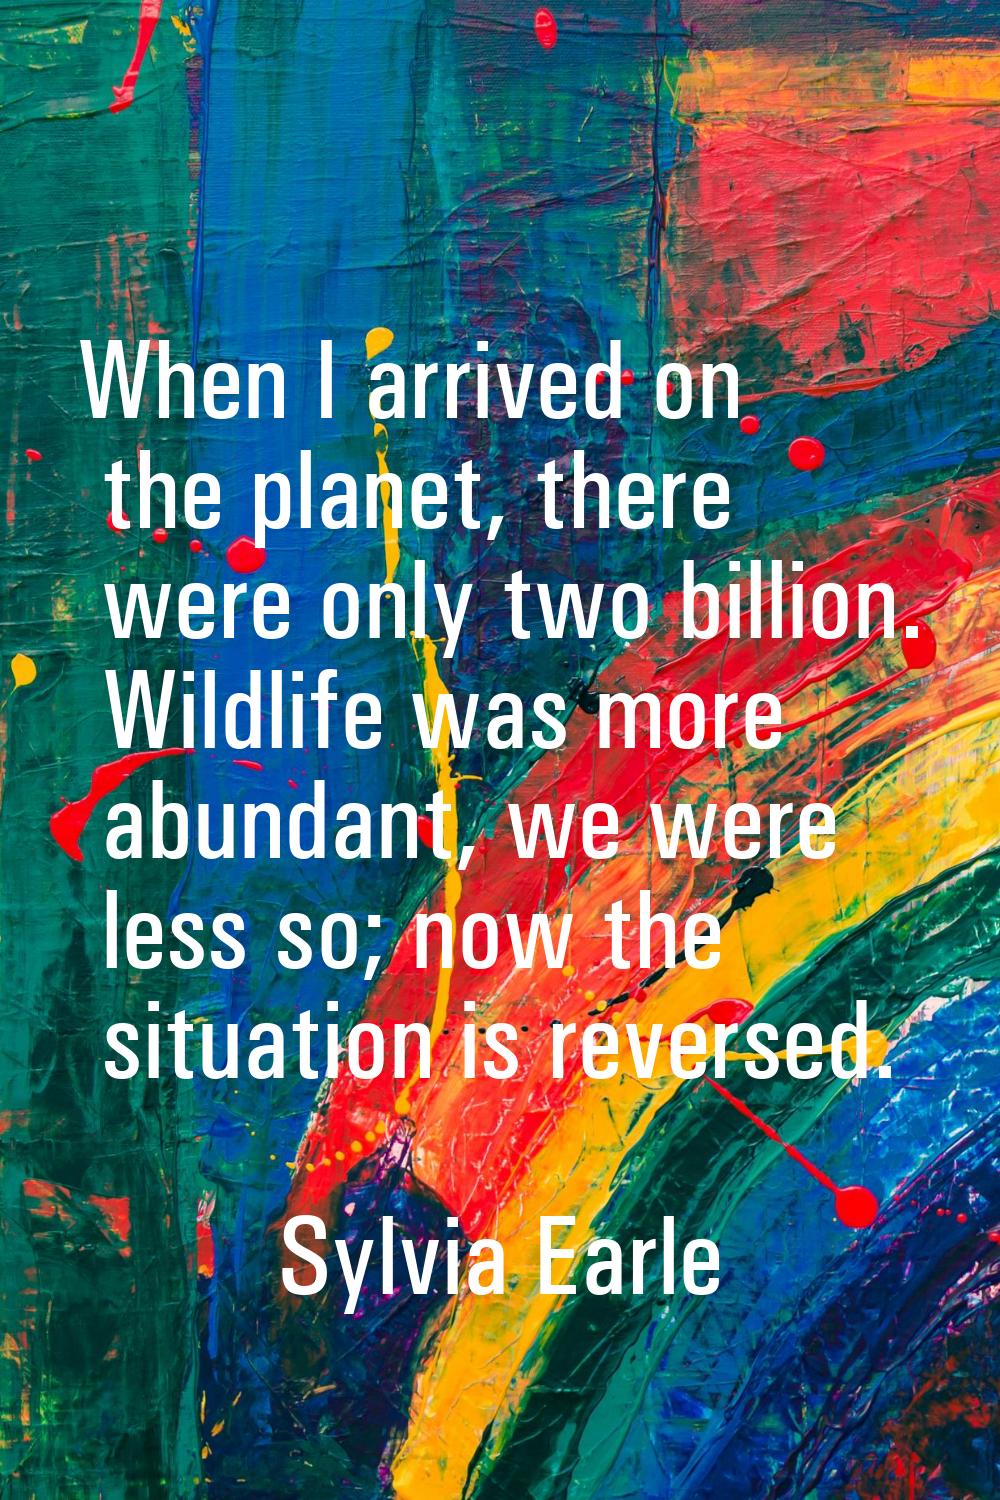 When I arrived on the planet, there were only two billion. Wildlife was more abundant, we were less